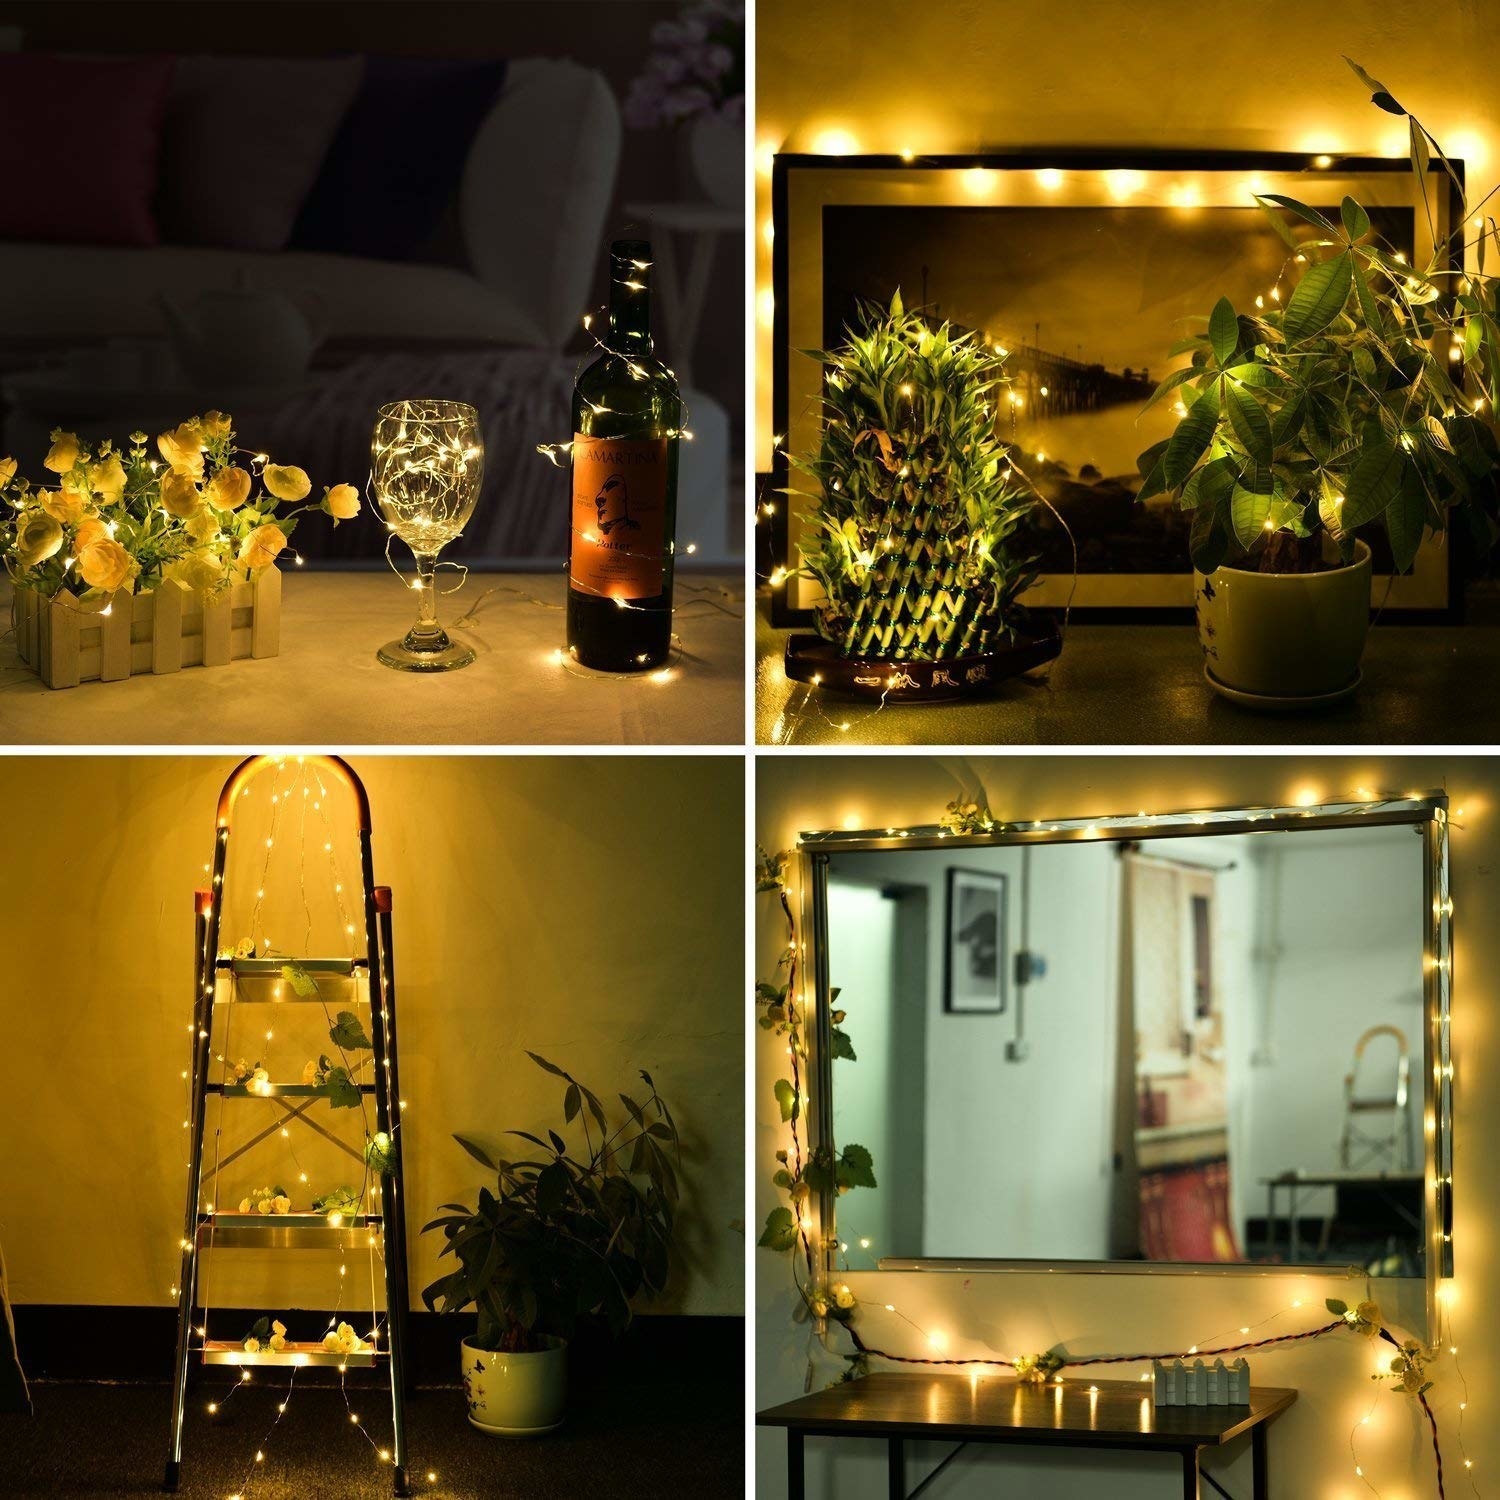 A collage of different places in a house decorated with fairy lights